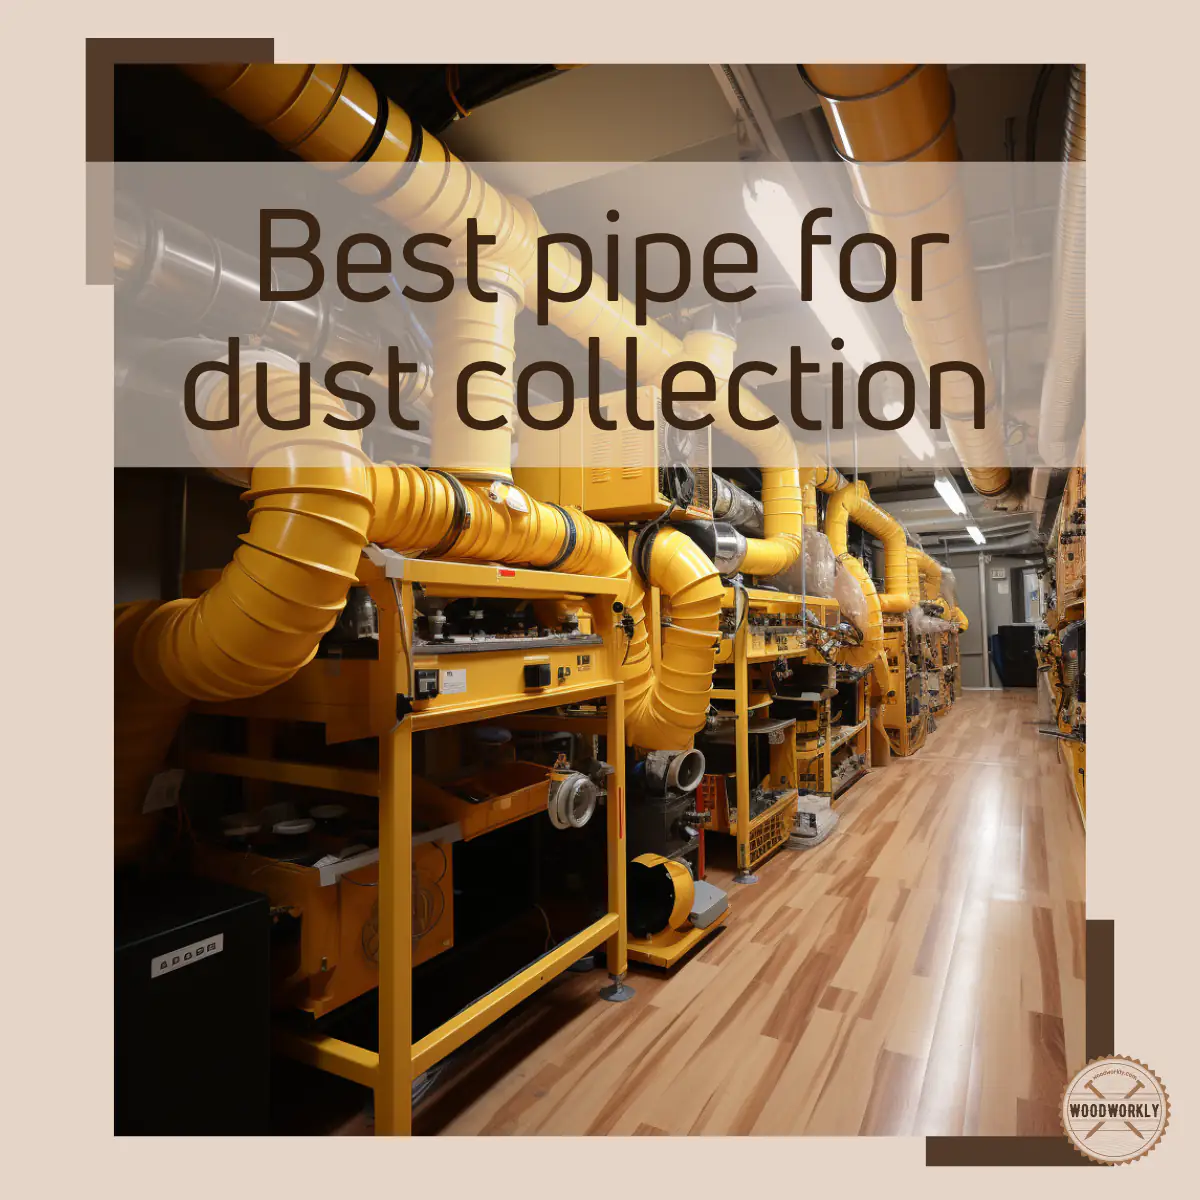 Best pipe for dust collection